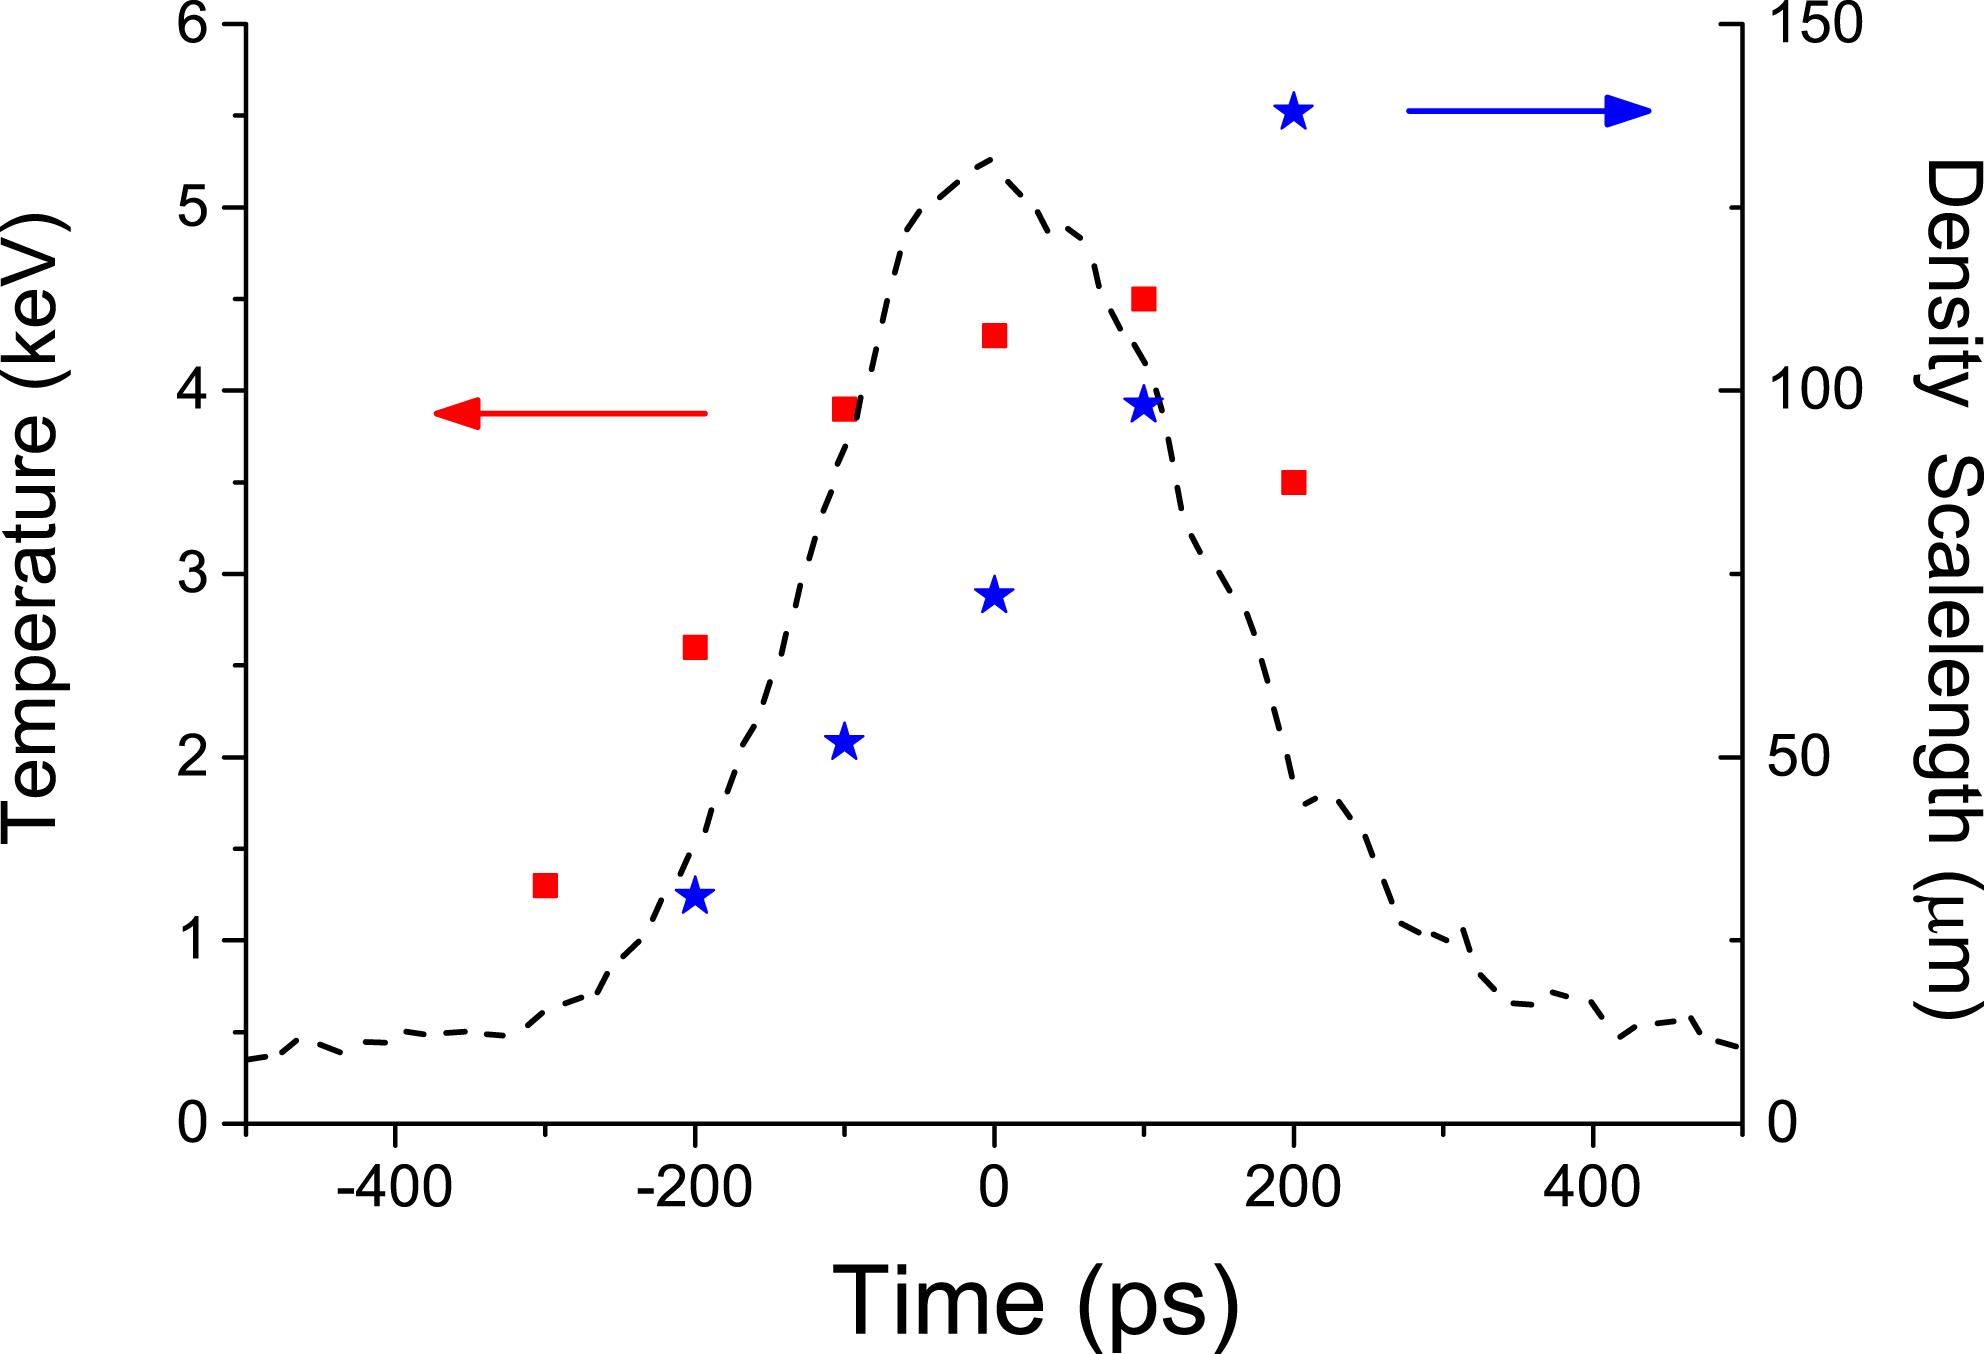 Instantaneous values of electron temperature $T_{e}$ (red squares) and density scalelength $L$ (blue stars) in the density range $0.05{-}0.25\,n_{c}$, as obtained by CHIC hydrosimulations in the experimental conditions of the interaction. The dashed line indicates the laser pulse profile.